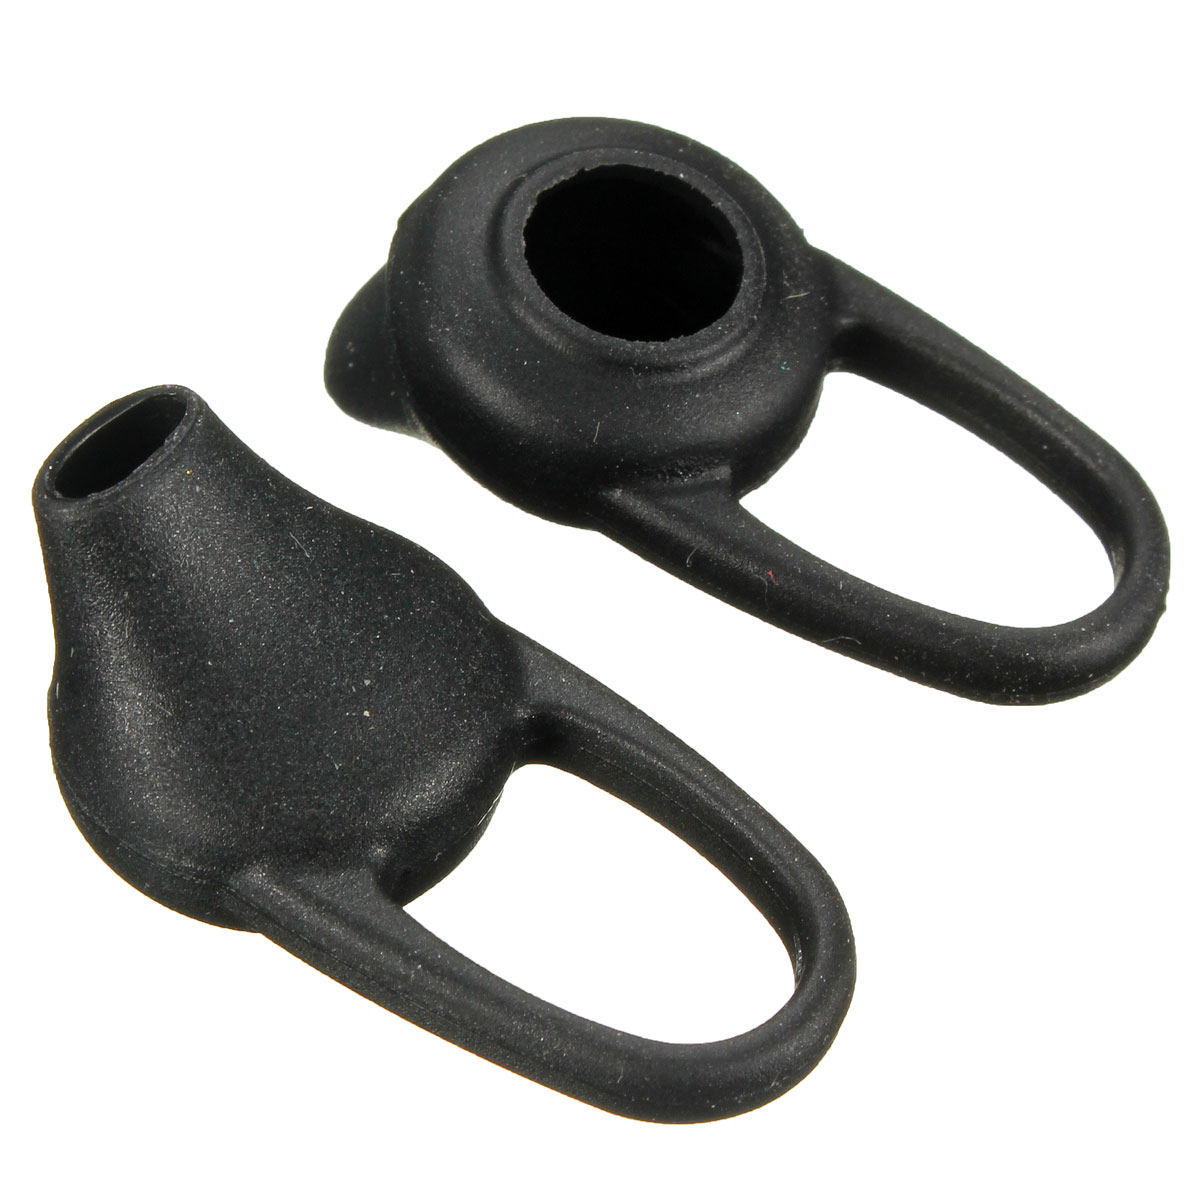 2pcs-Silicone-Earphone-Covers-Cap-Replacement-Earbud-Bud-Tips-Earbuds-Eartips-Earplug-Ear-Pads-1974853-3